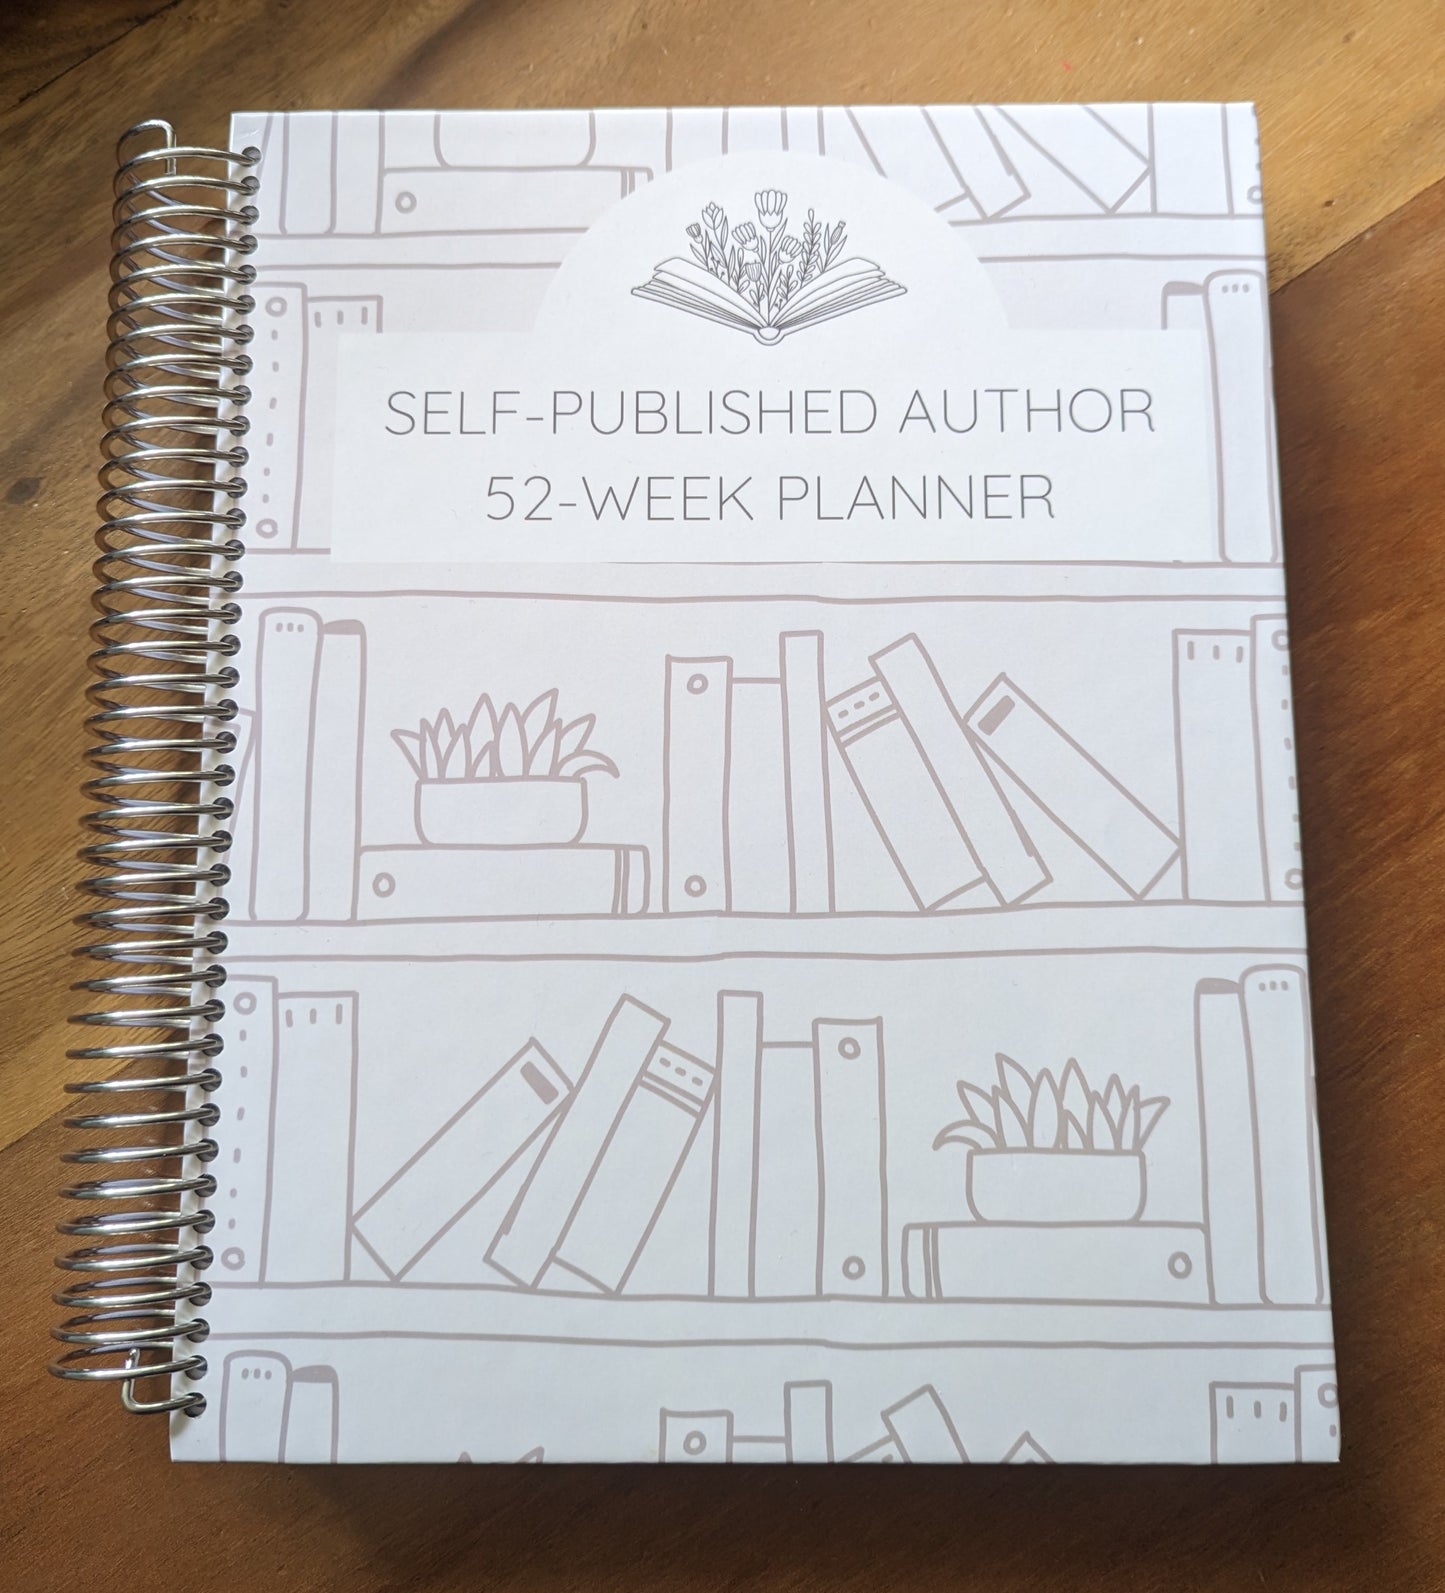 Self-Published Author 52-Week Planner (Physical Version)